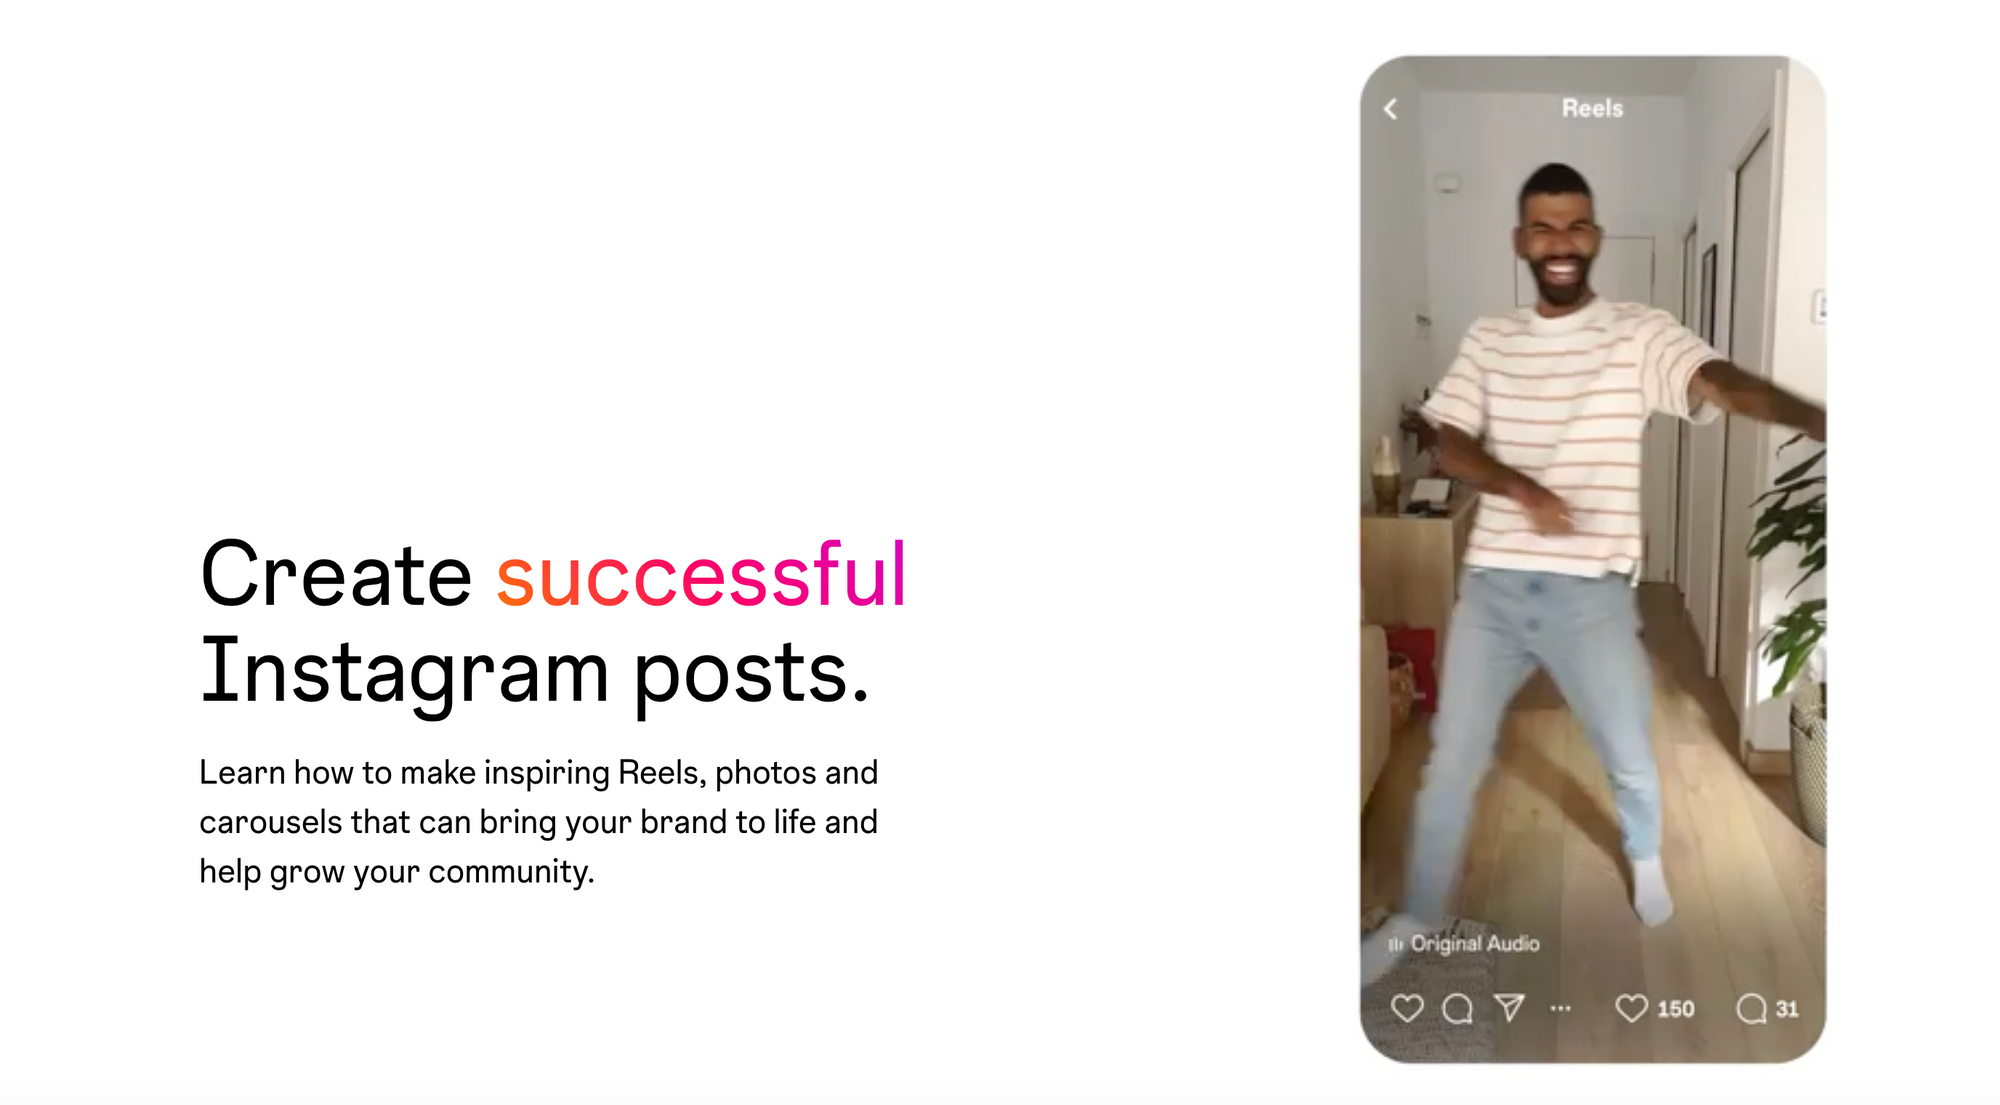 Learn How to Post Instagram